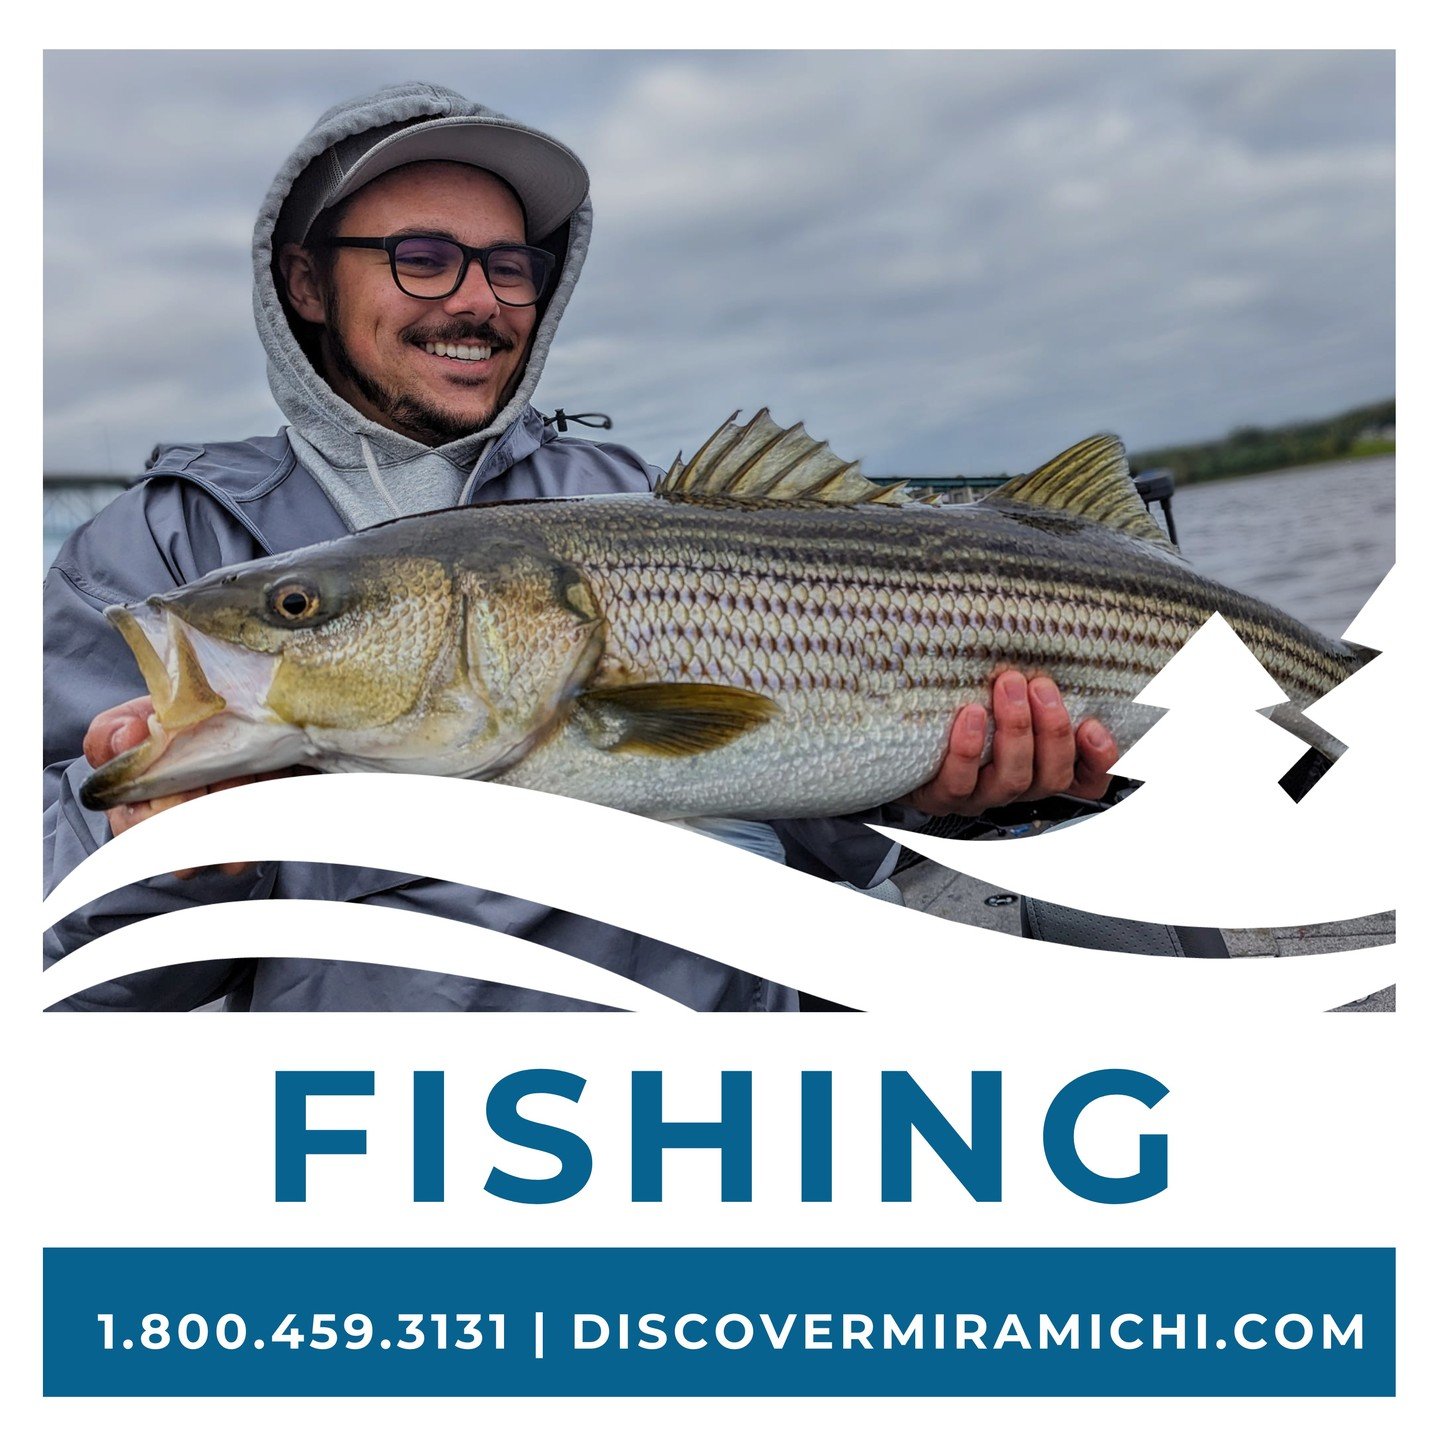 Famous for our fishing, the Miramichi Region offers a variety of packages for the ultimate fishing vacation. Spend your day alongside experienced guides who can take you to that secret spot. Cast your line and rediscover a memorable fishing experienc